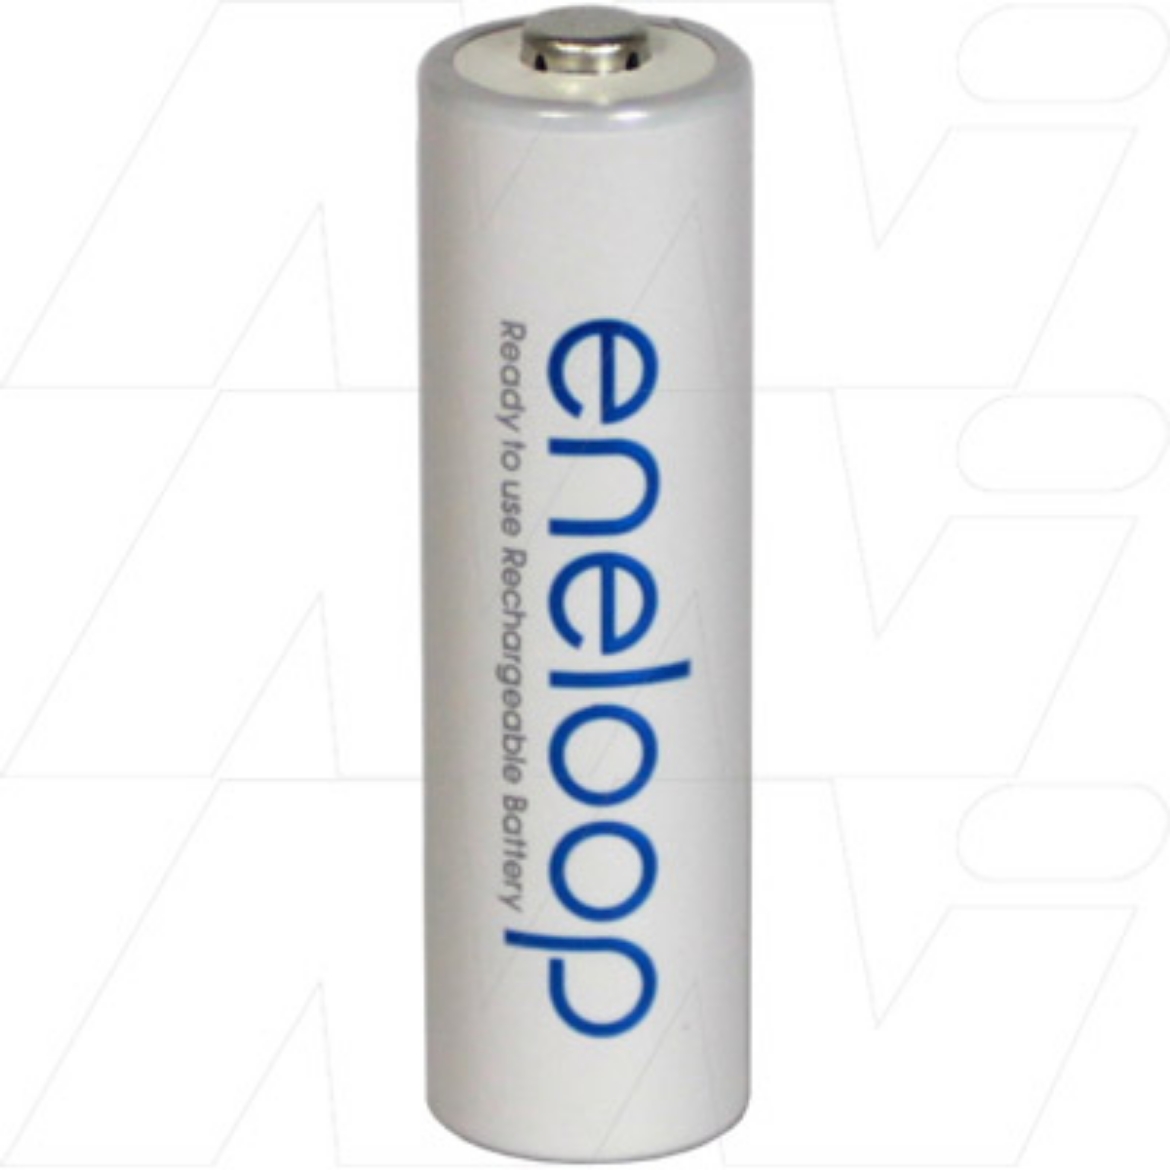 Picture of BK-3MCCE ENELOOP NiMh AA 1.2V 2000mAh BATTERY **BULK PACKED** -- (READY TO USE)